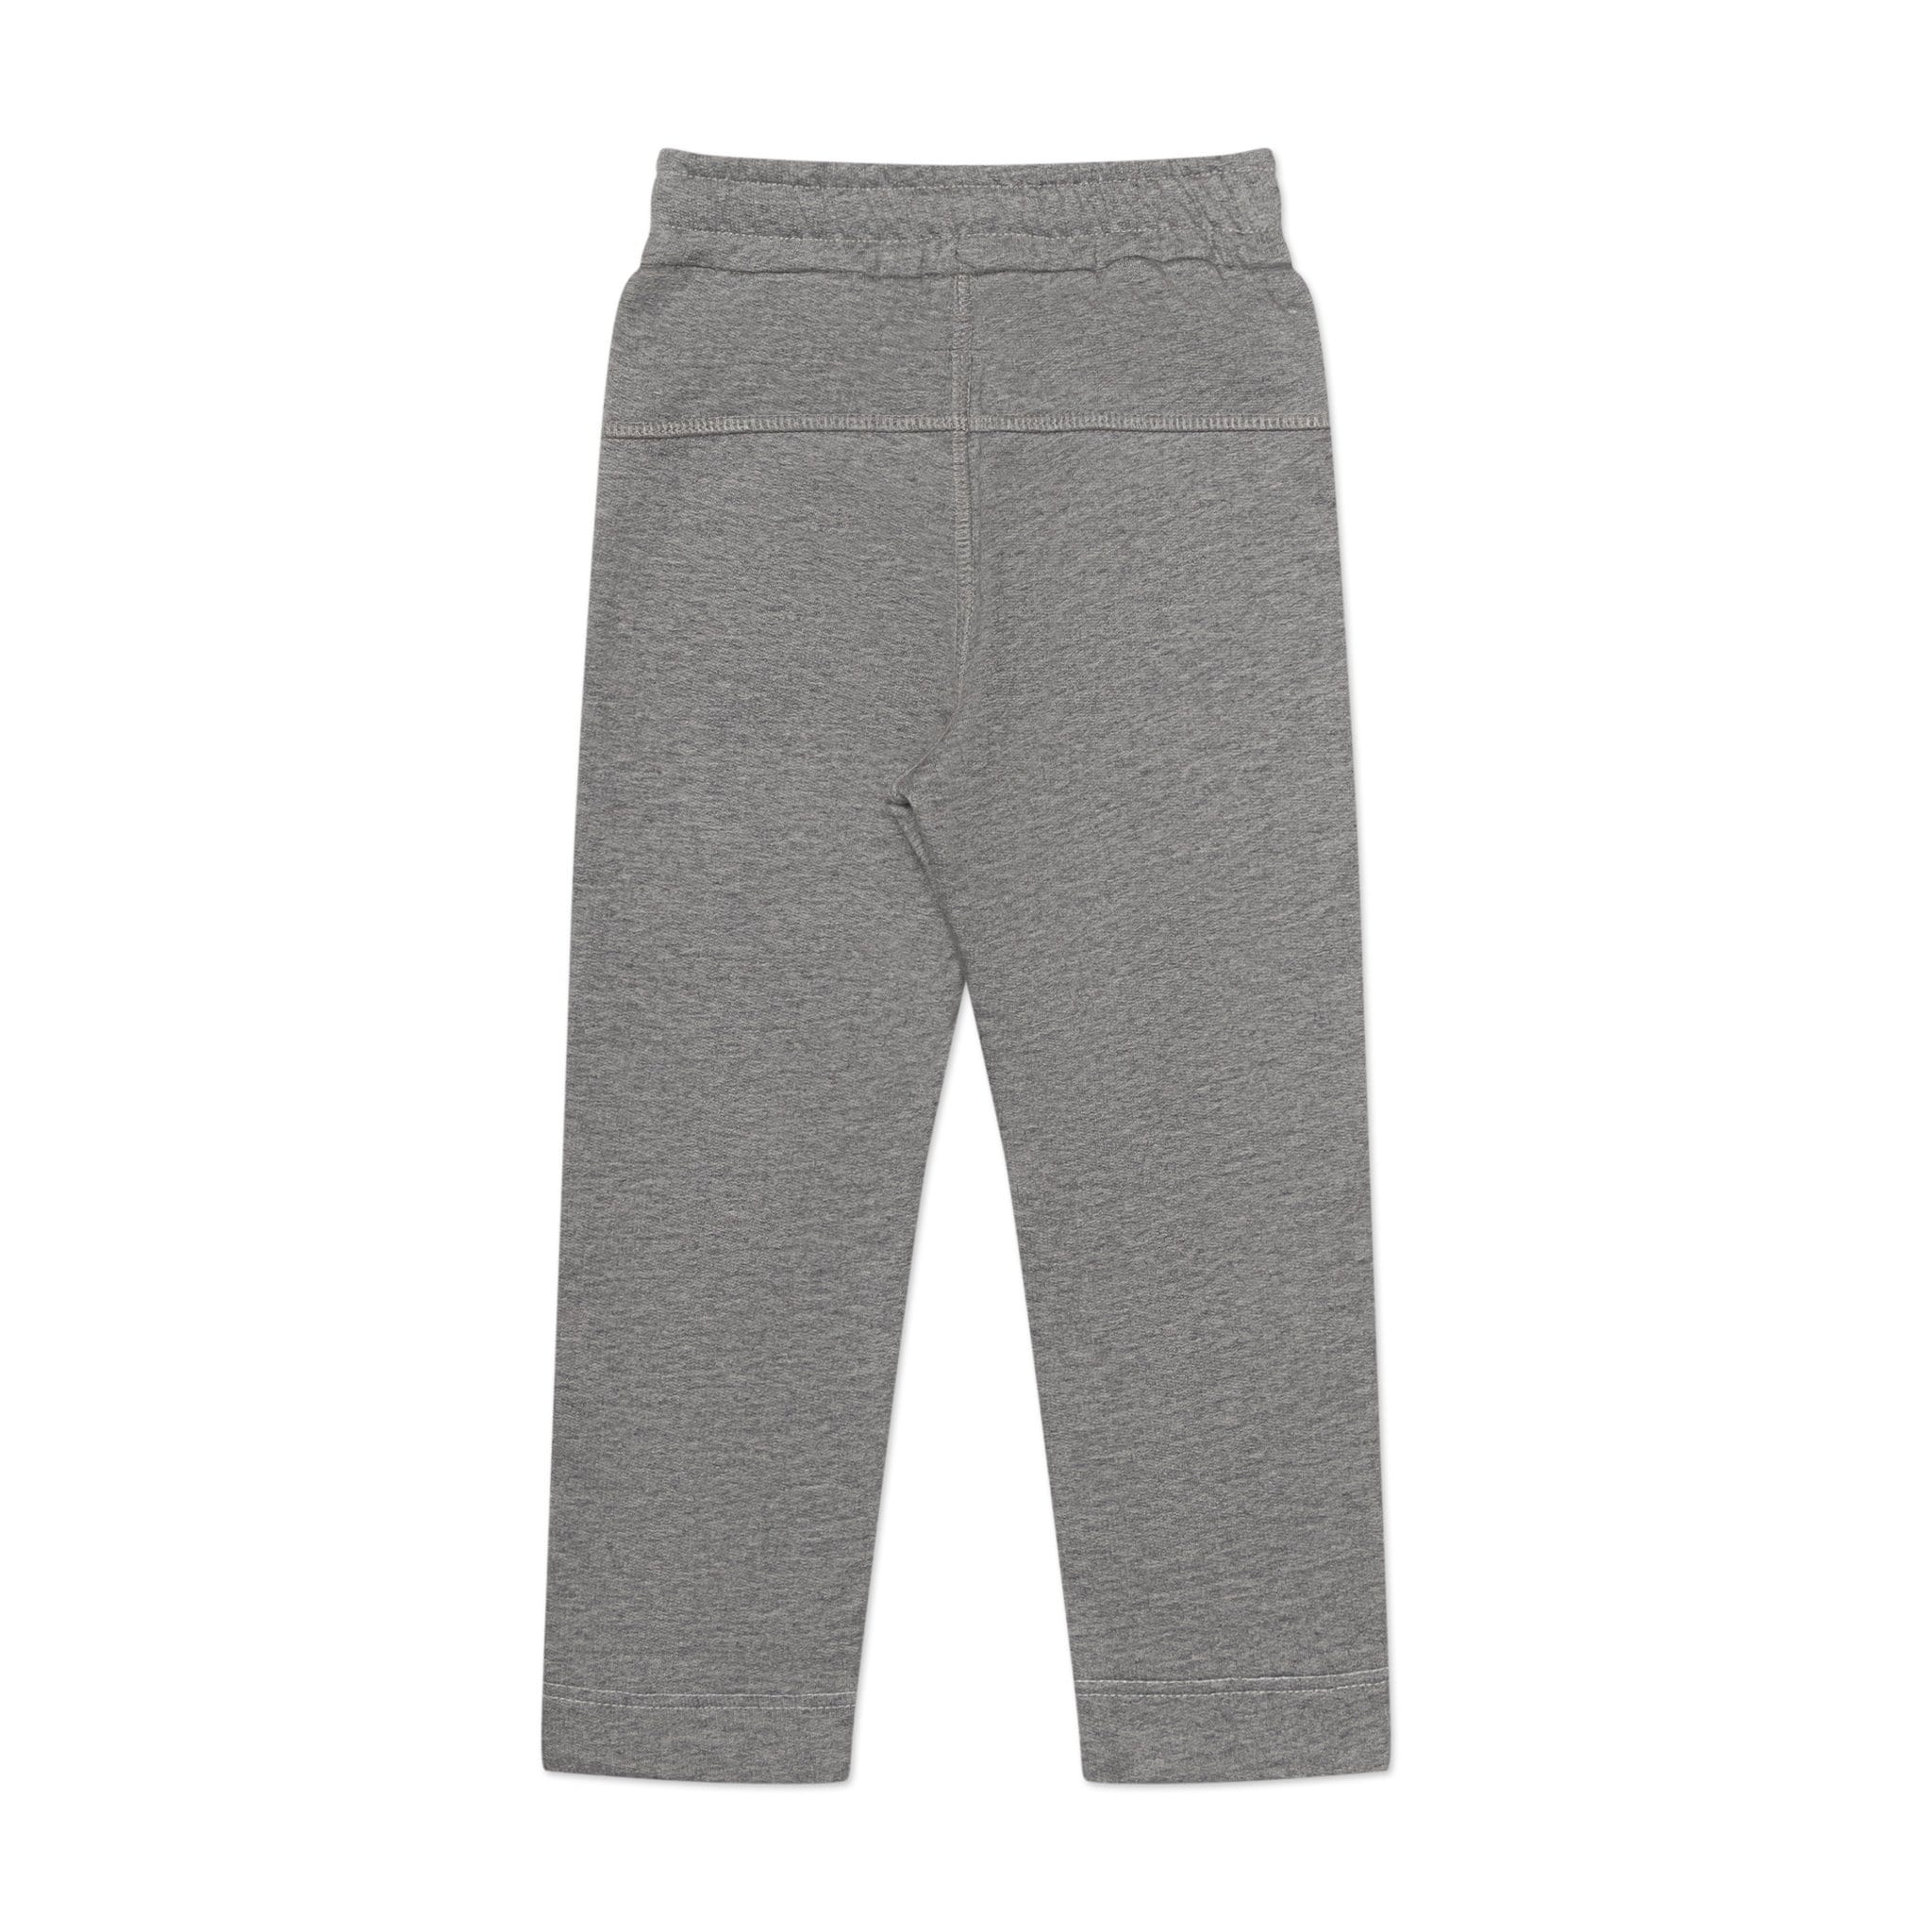 Firebird Bottoms Colorblock Fleece Joggers Made in NYC and LA Unisex 100 Percent Organic Kids Clothes